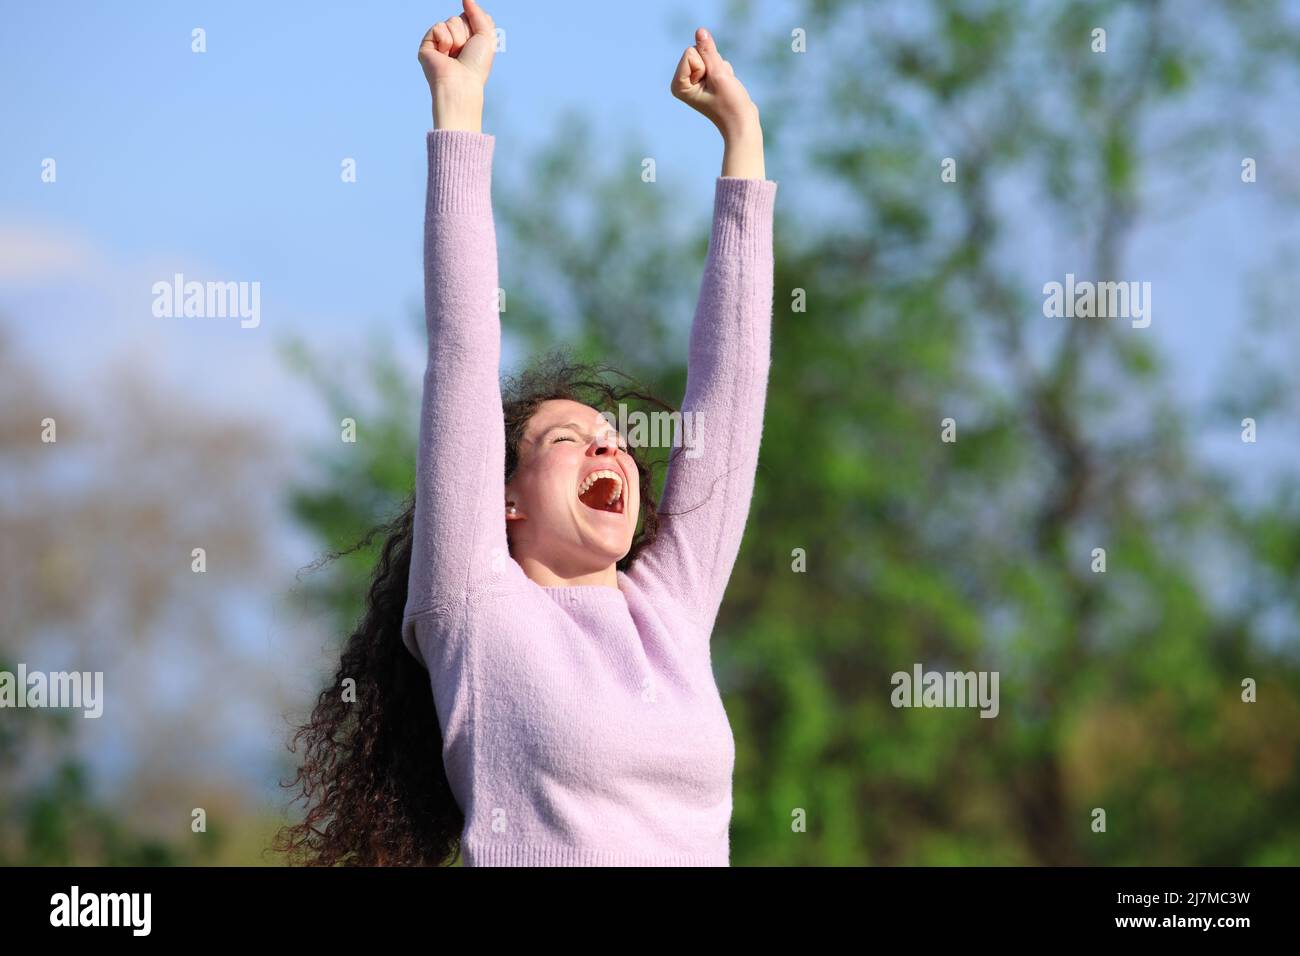 Excited woman raising arms in a park celebrating a good day wearing sweater Stock Photo